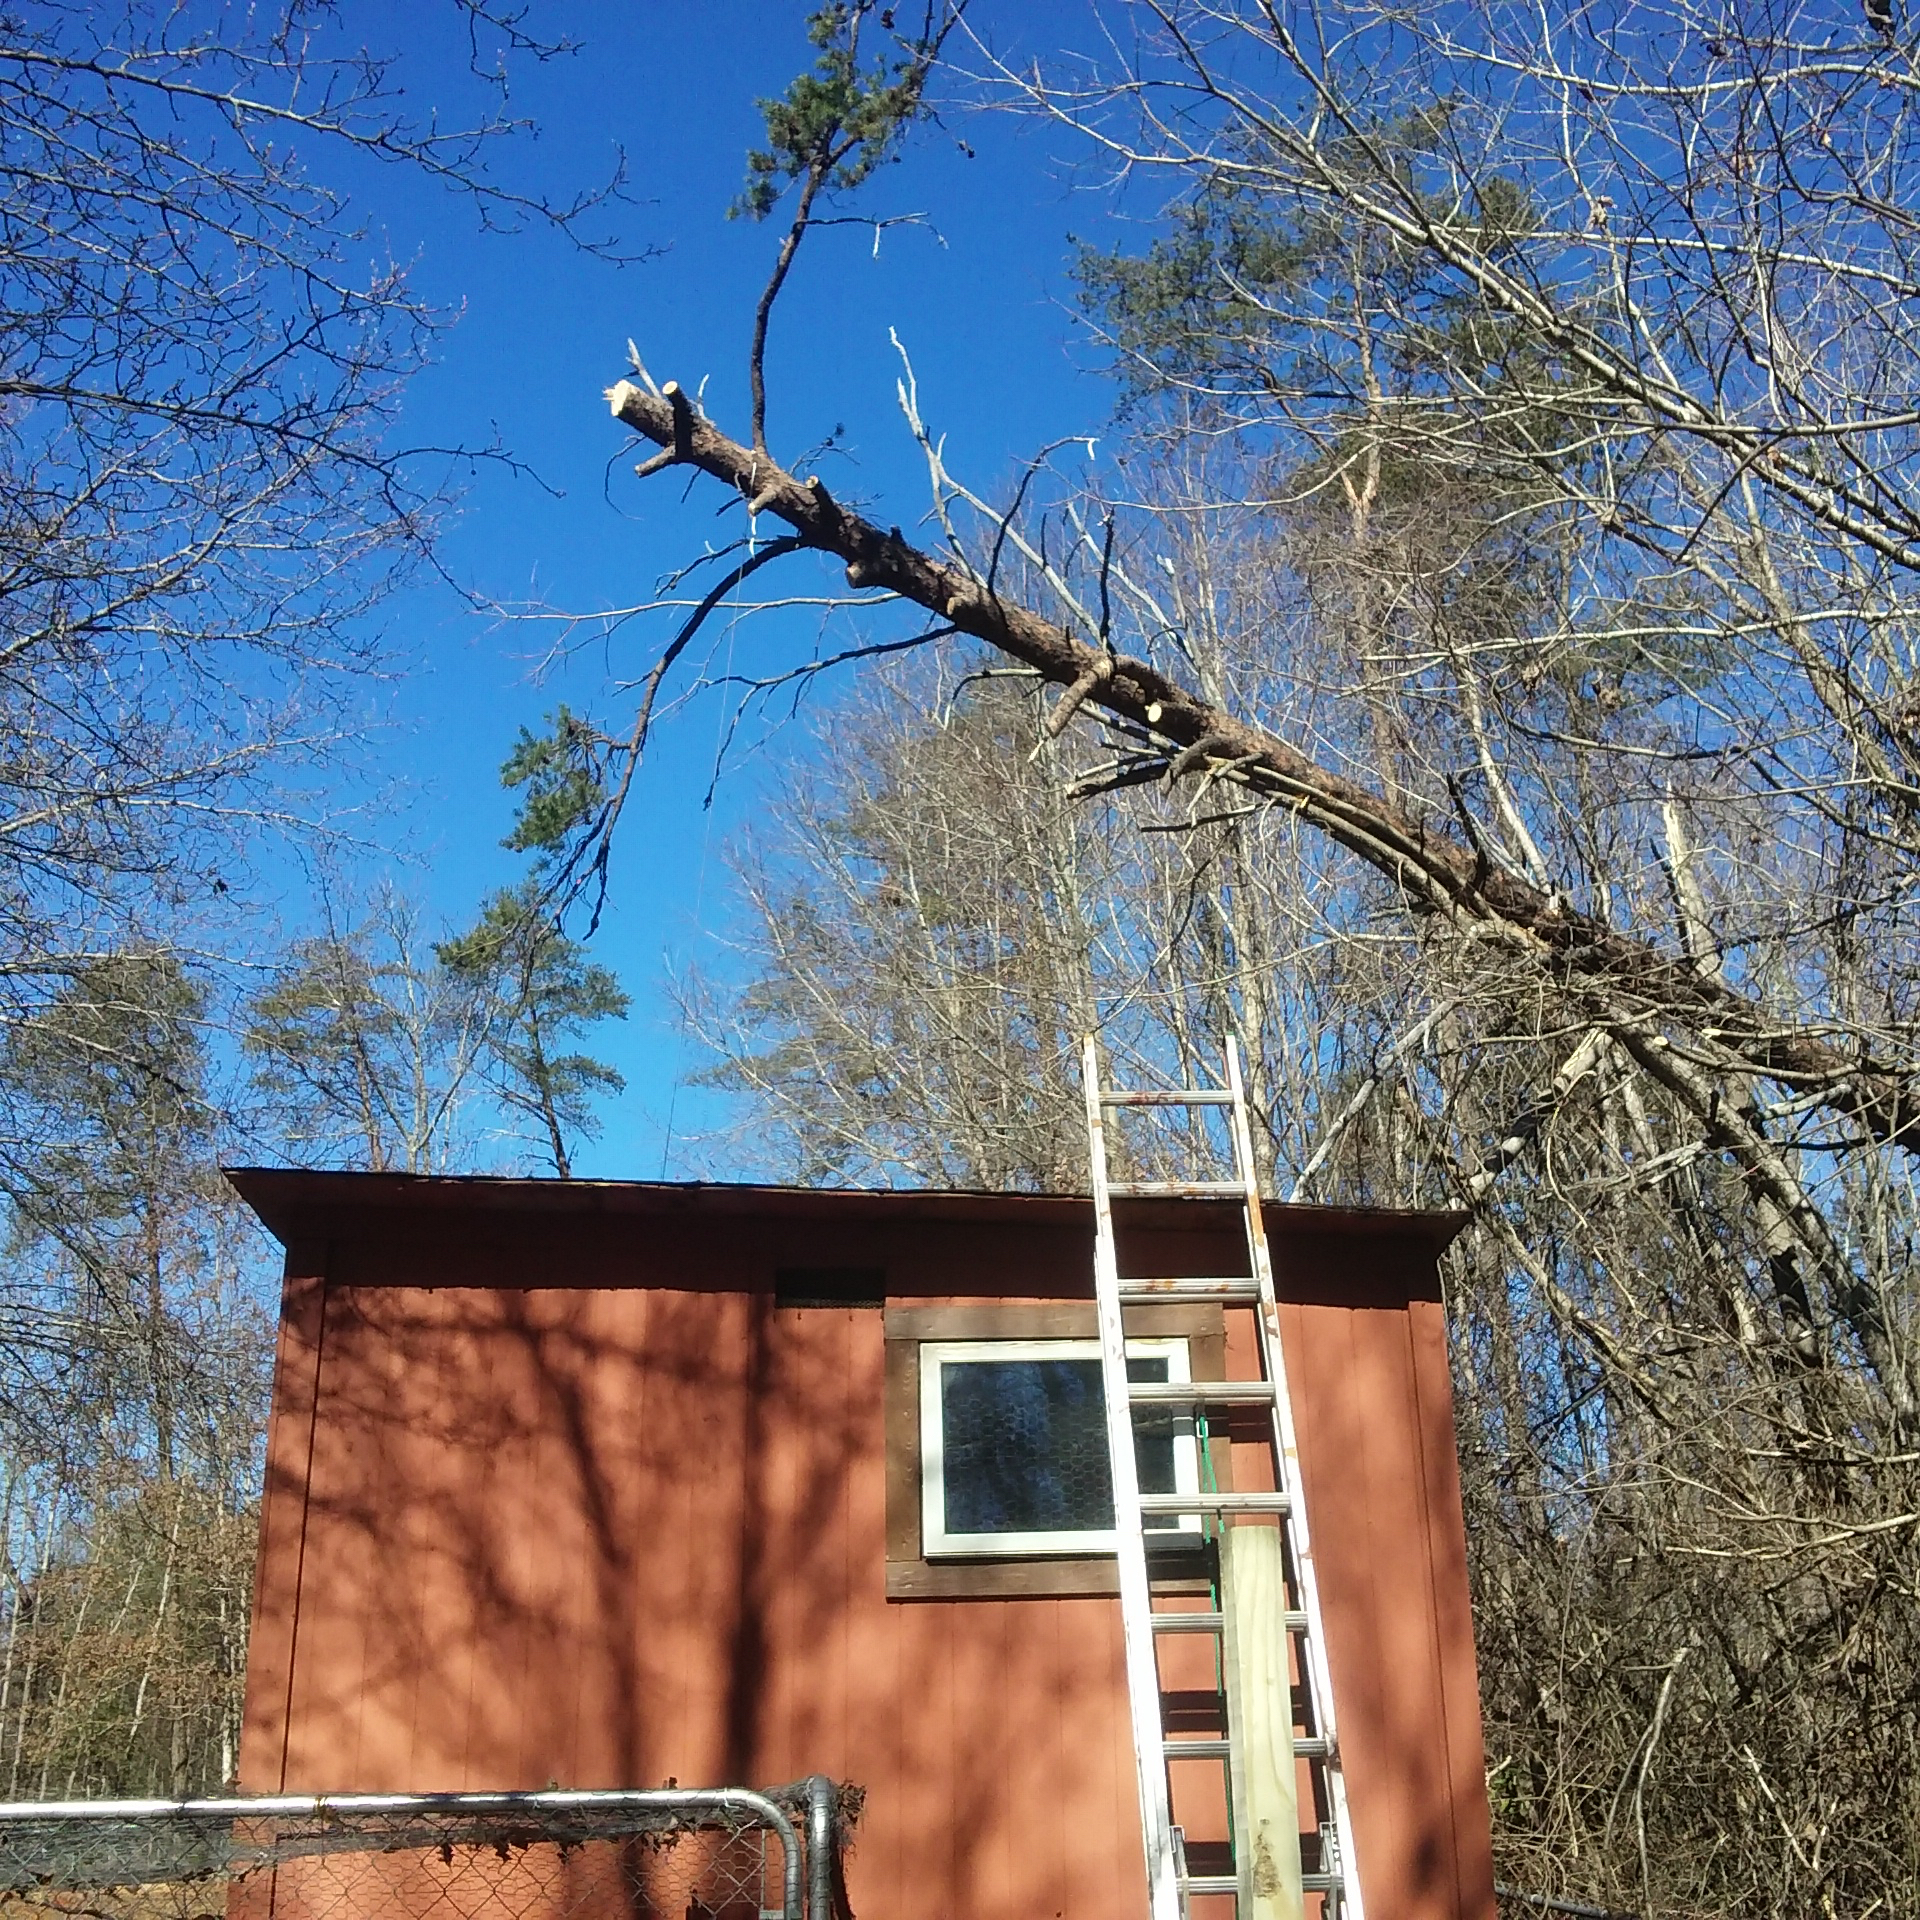 If you look at how far over the roof of the coop that tree is, you will realize that he had to place another ladder on the roof and get on top of that to get close enough to get the end of that rope around the tree.